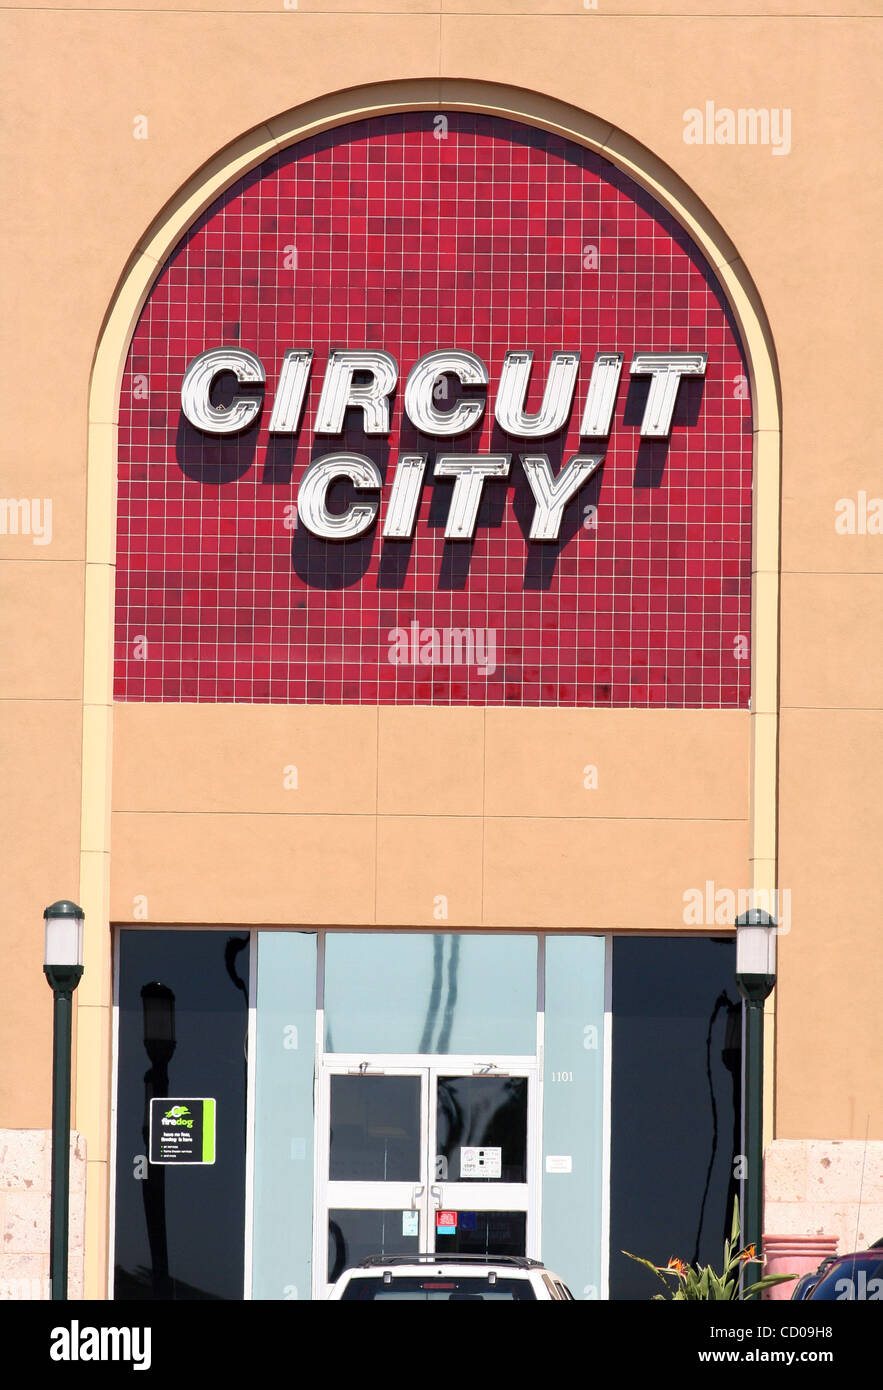 Nov 03, 2008 - Newport Beach, CA, USA - Circuit City has announced plans to close 155 U.S. stores, including this one in Santa Barbara. The company, the No. 2 U.S. consumer electronics chain, says it is also considering options to restructure its business. Analysts suggested the company could seek b Stock Photo